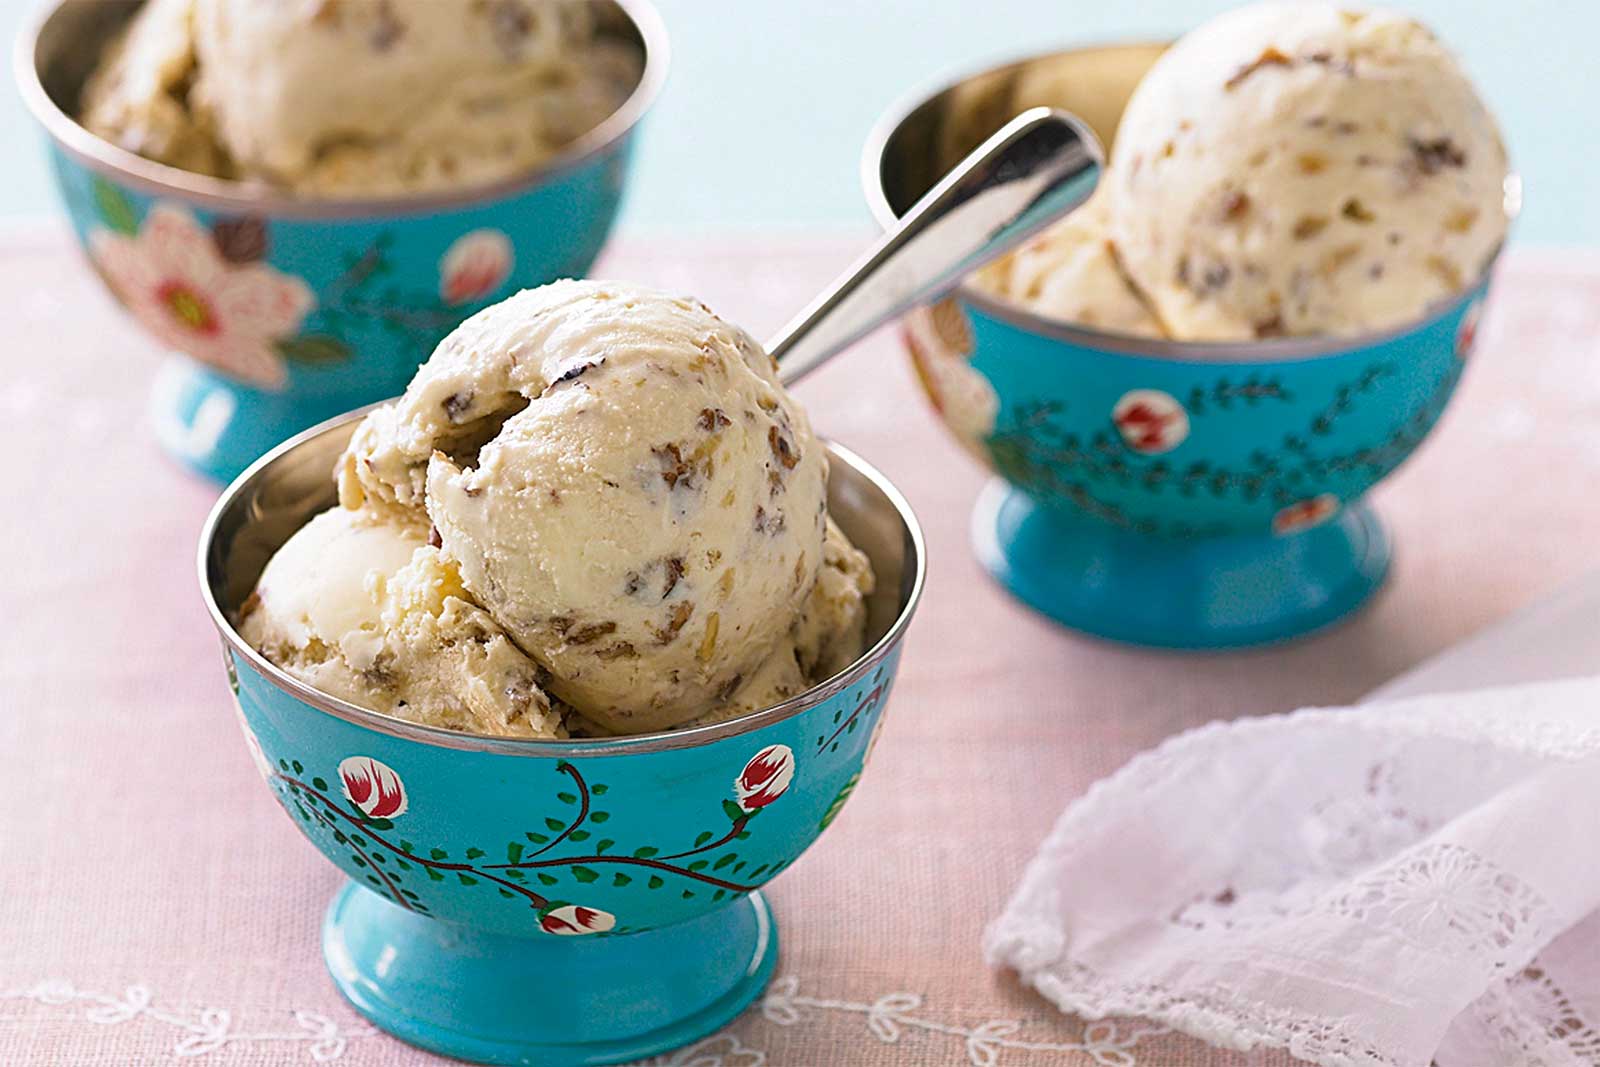 Say “Yuck” Or “Yum” to These Foods and We’ll Determine Your Exact Age Rum raisin ice cream